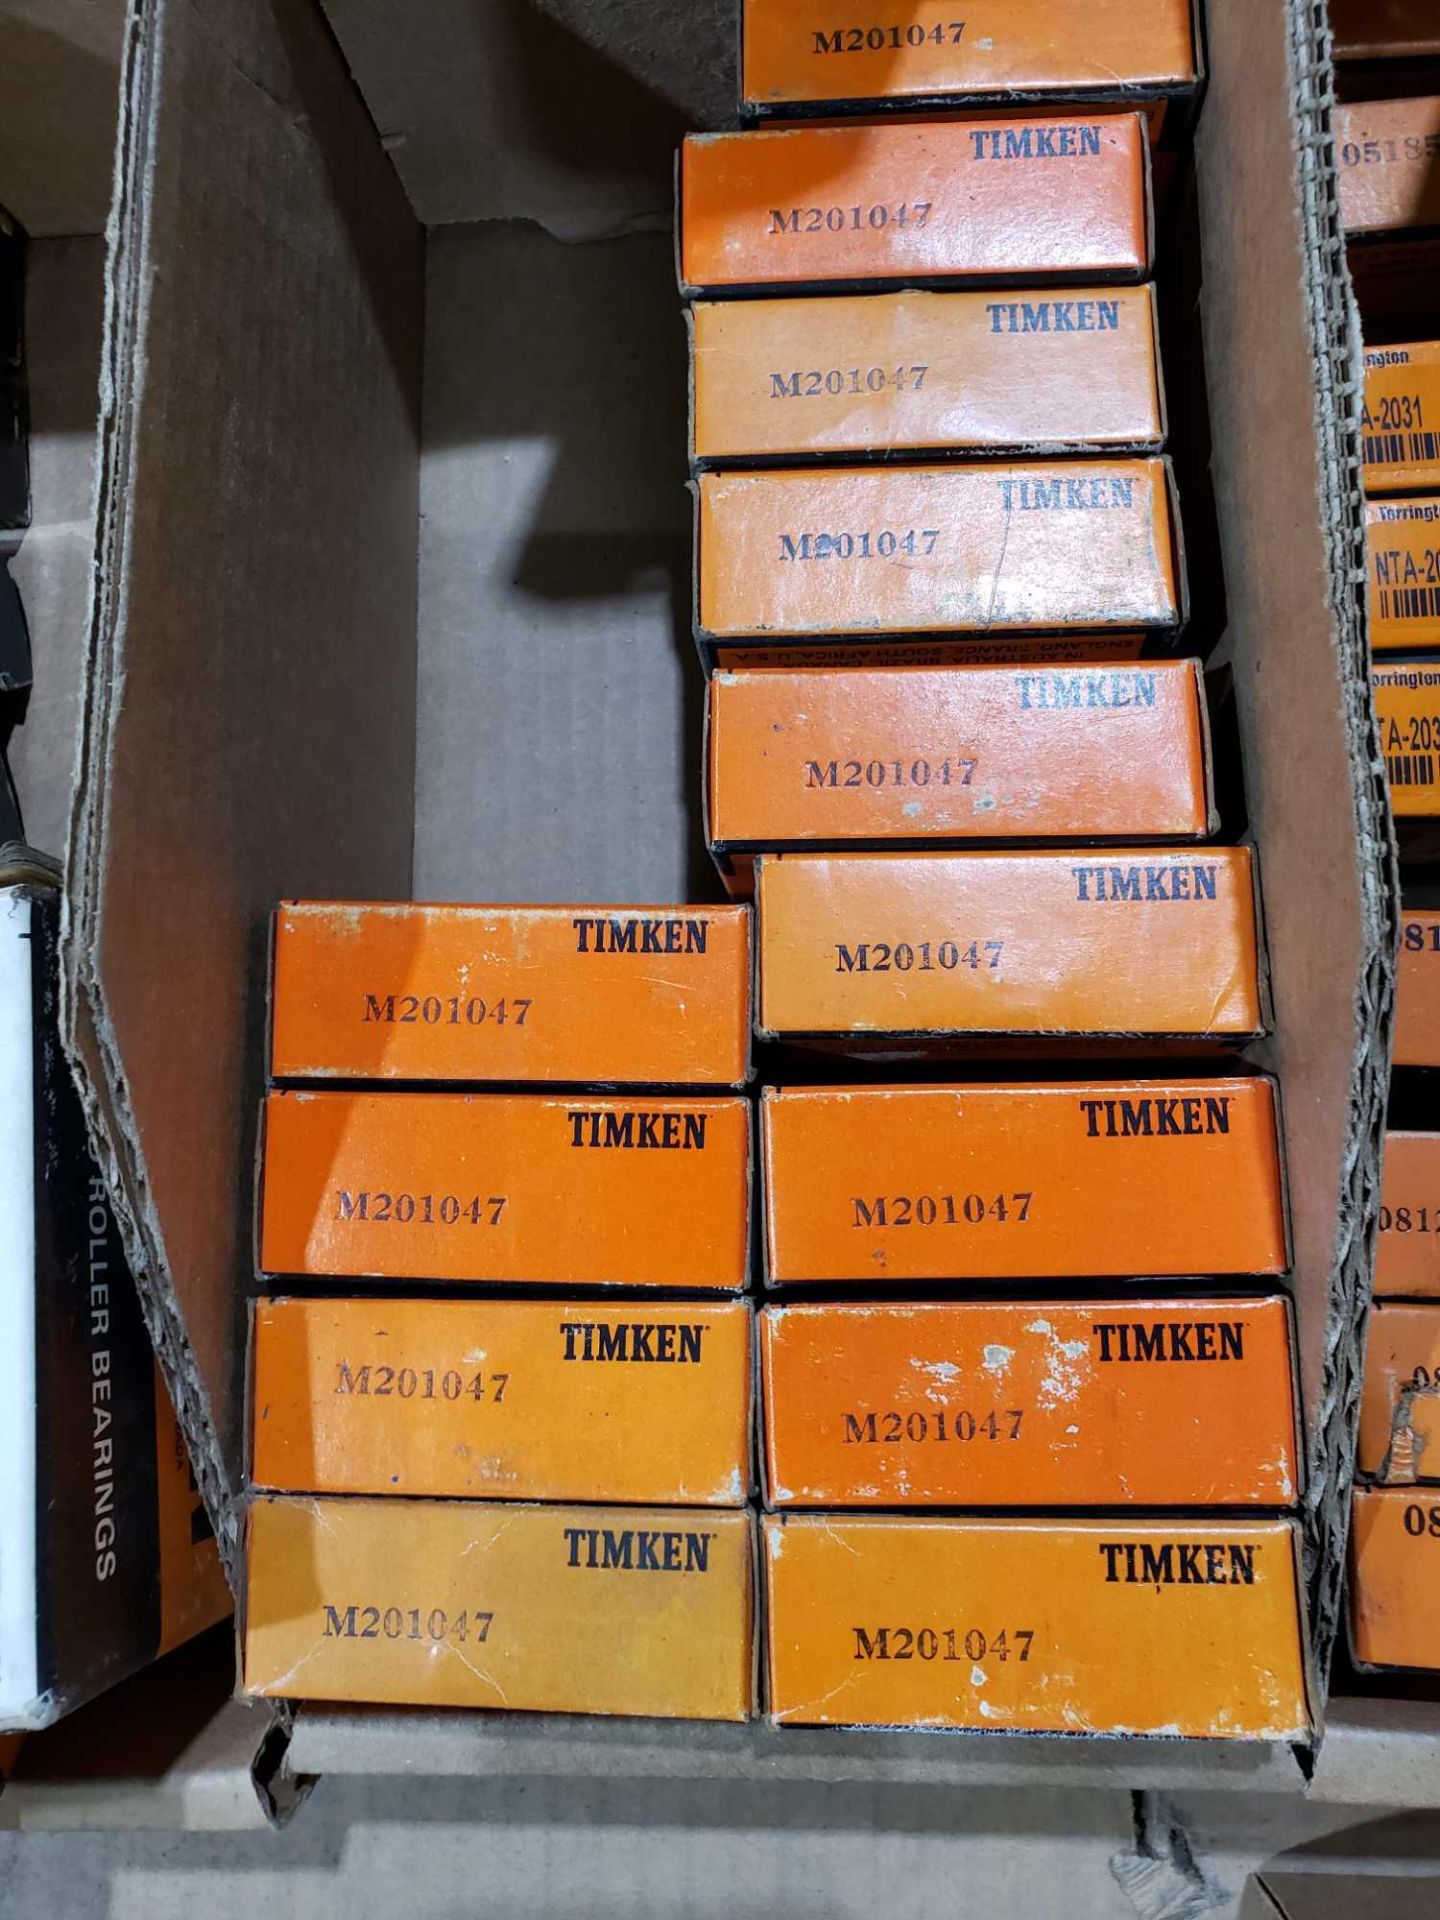 Qty 13 - Timken bearings, assorted part numbers. New in boxes as pictured. - Image 2 of 2